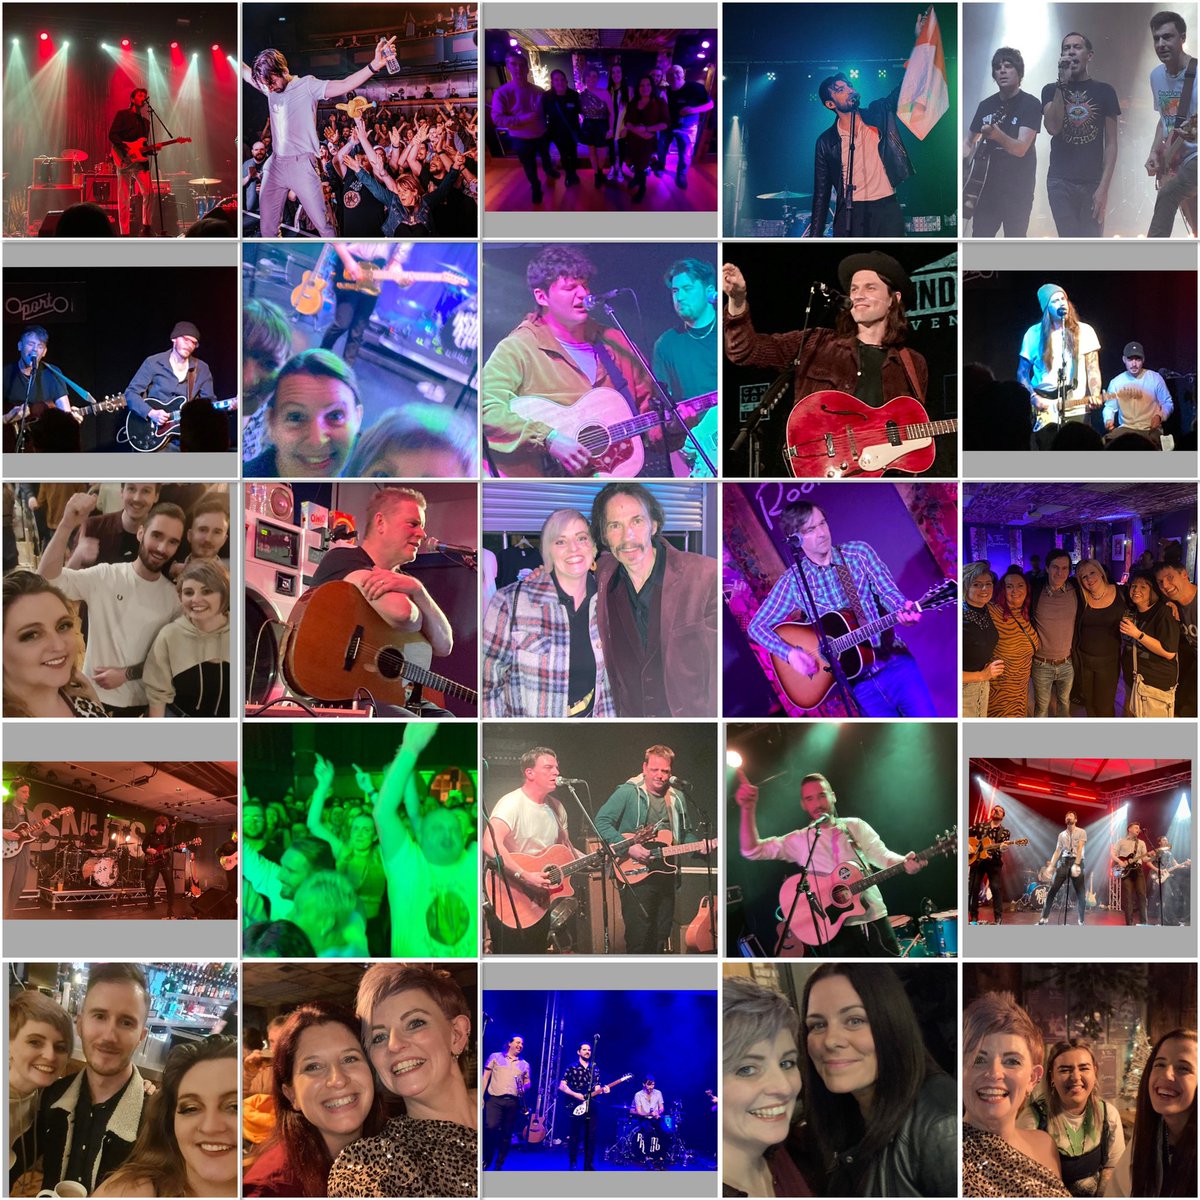 Musical memories….roll on many more #livemisic #gigbuddies